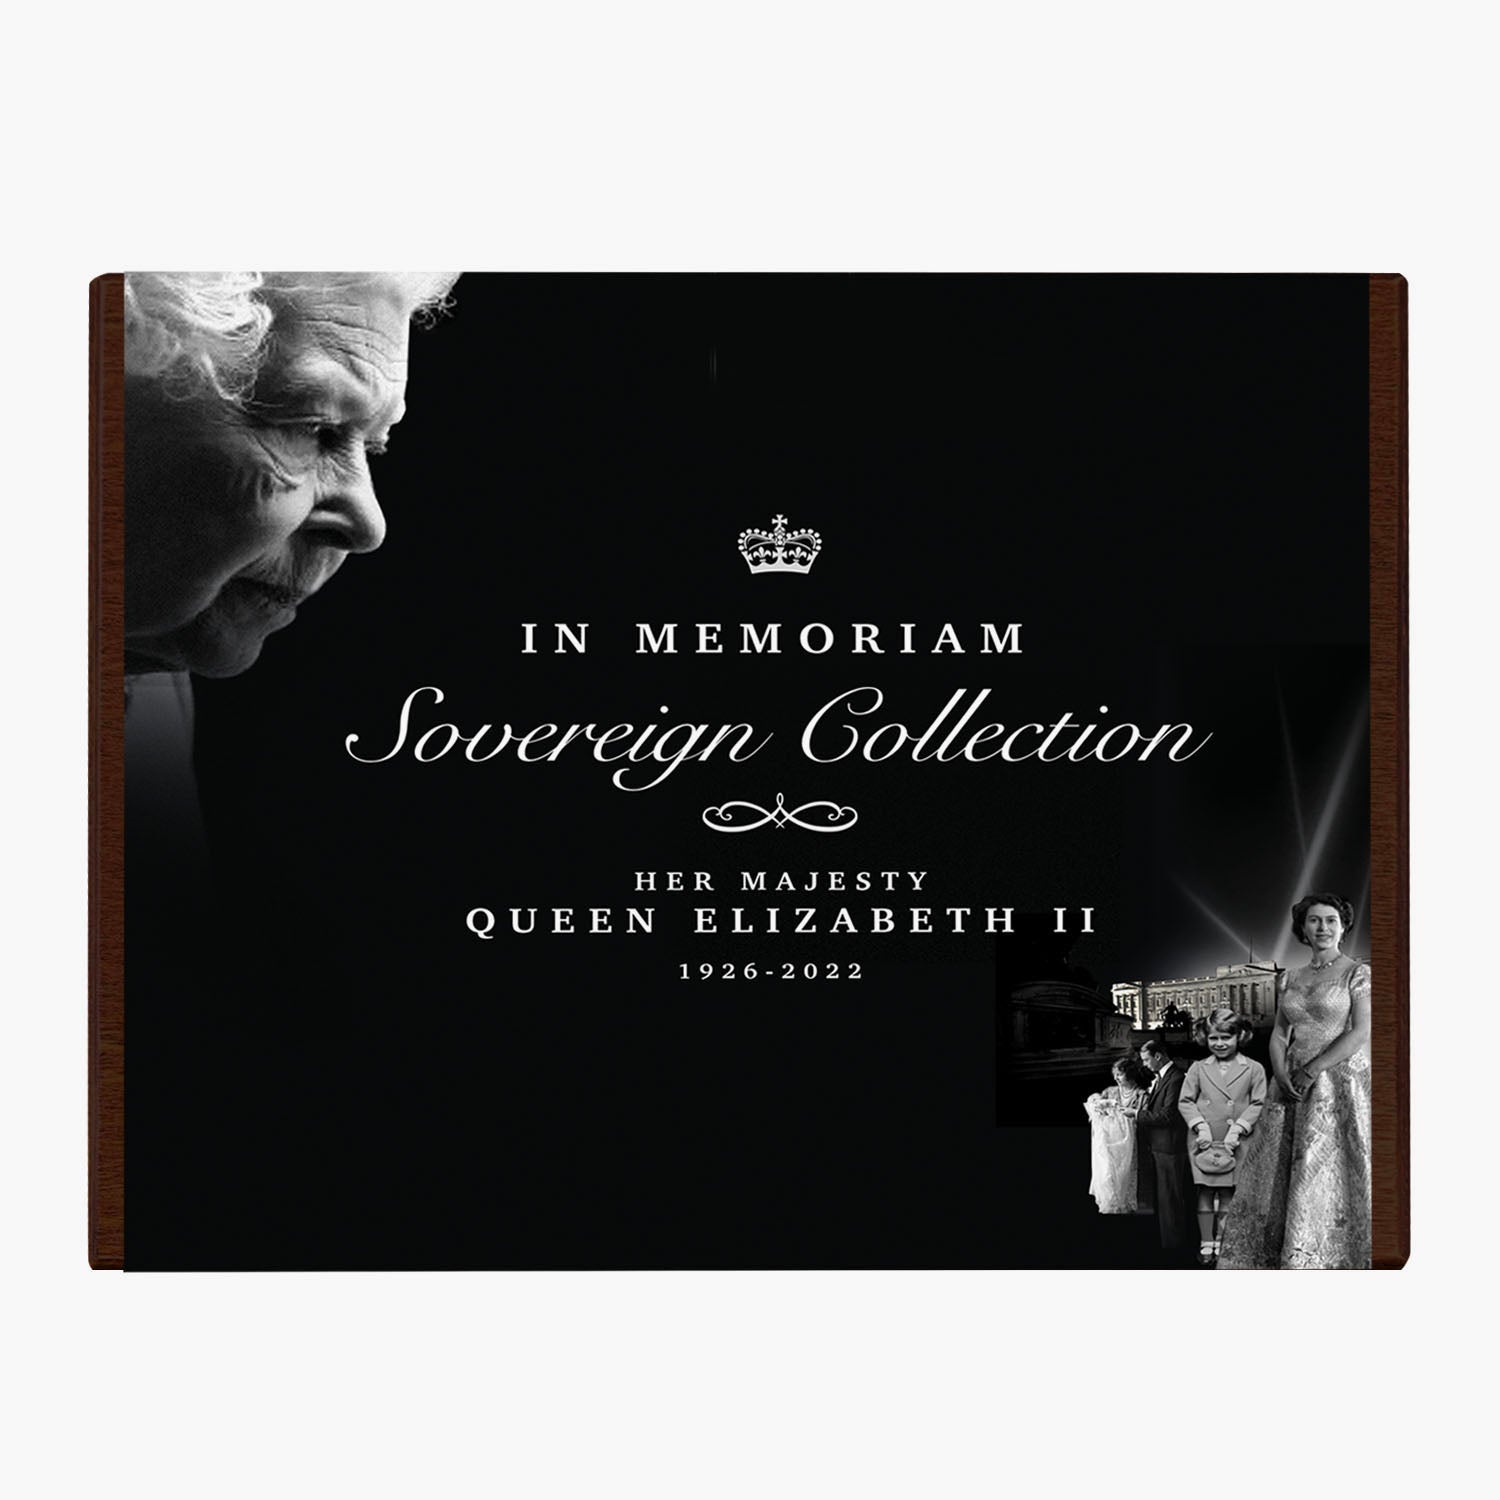 In memoriam First and Last Sovereign Collection